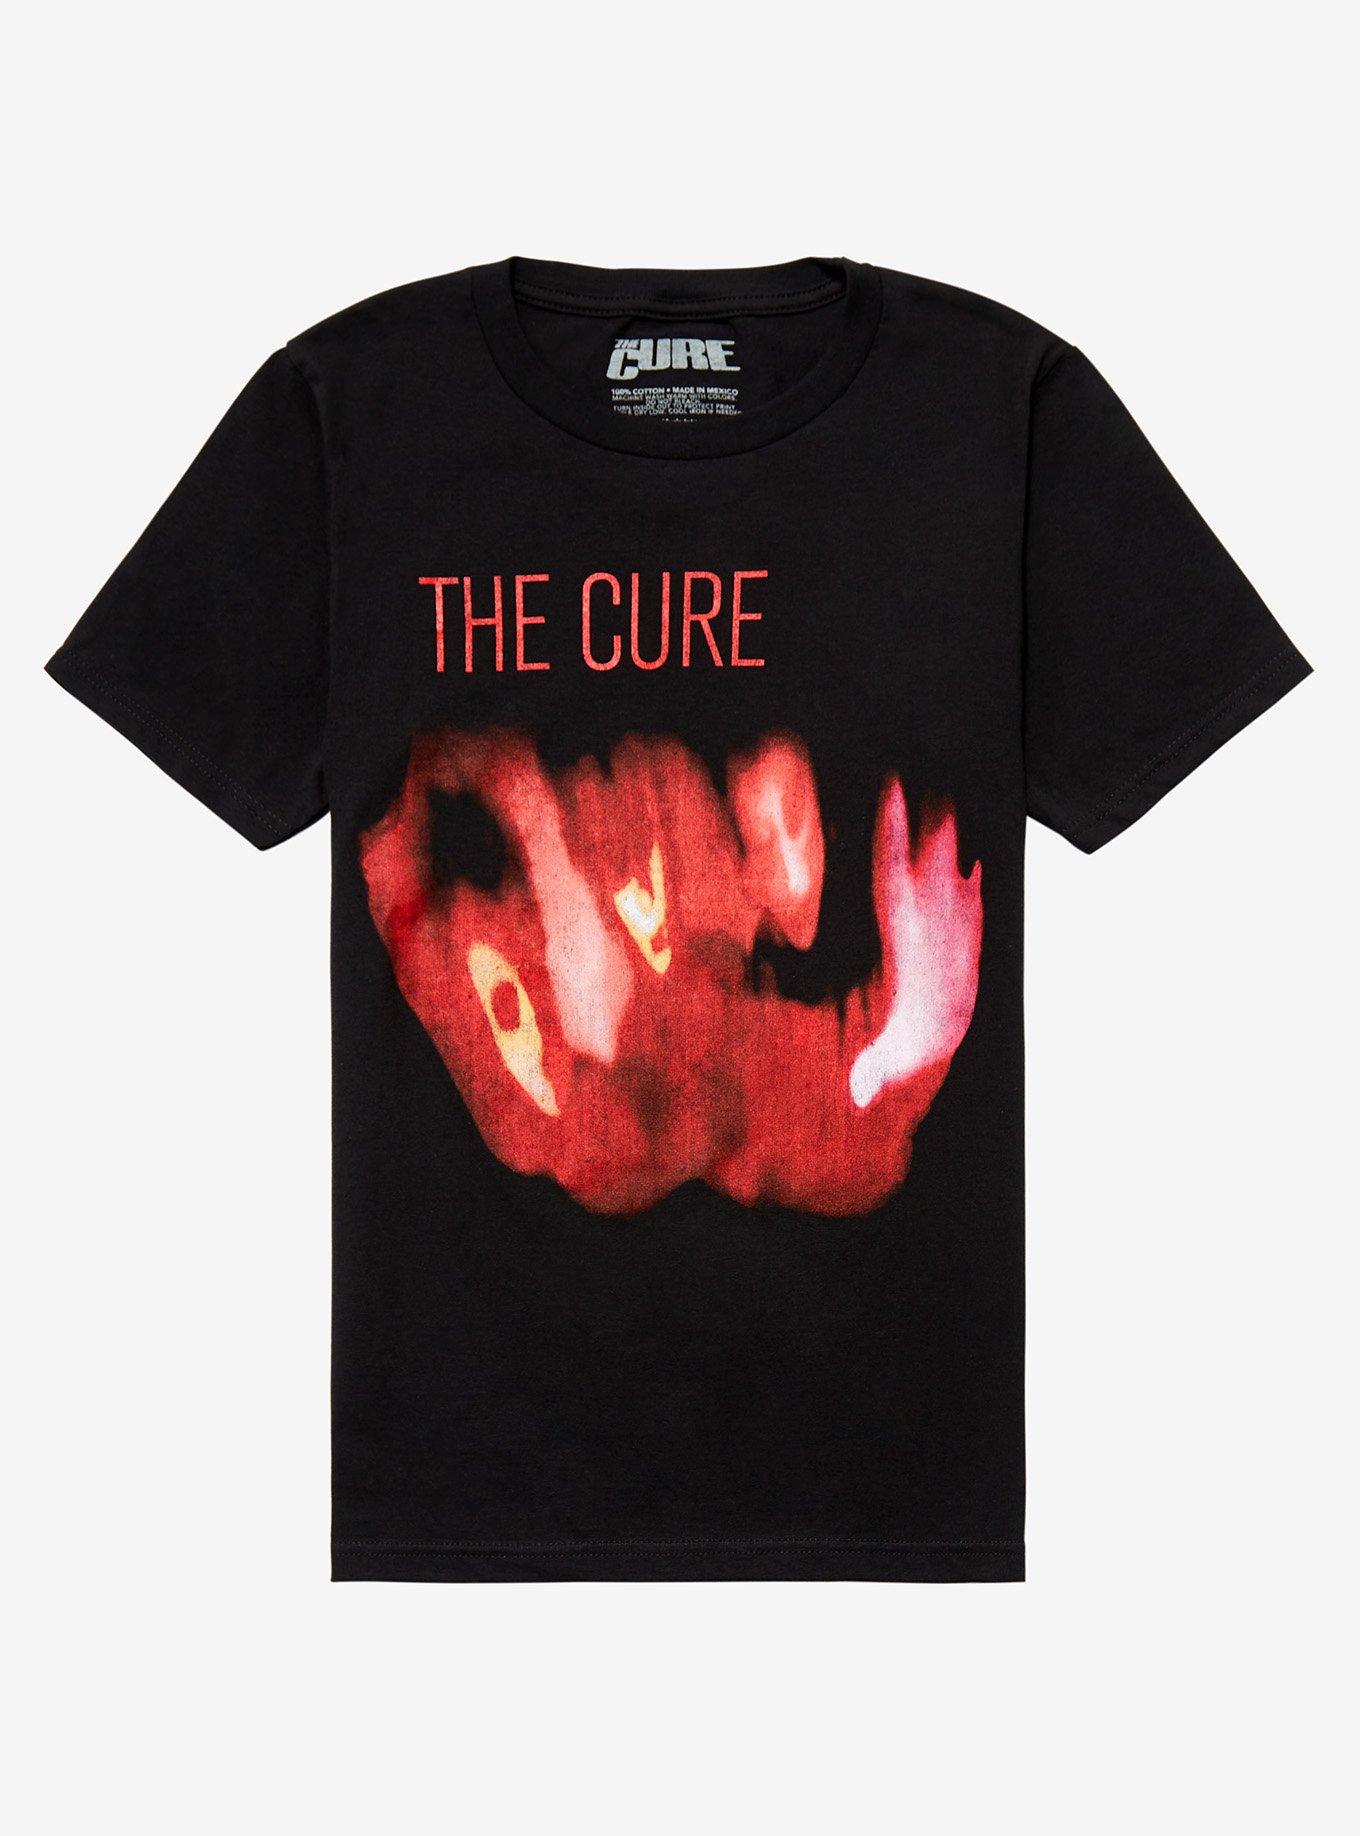 Baby 3x Bf - The Cure Blur Boyfriend Fit Girls T-Shirt | Hot Topic